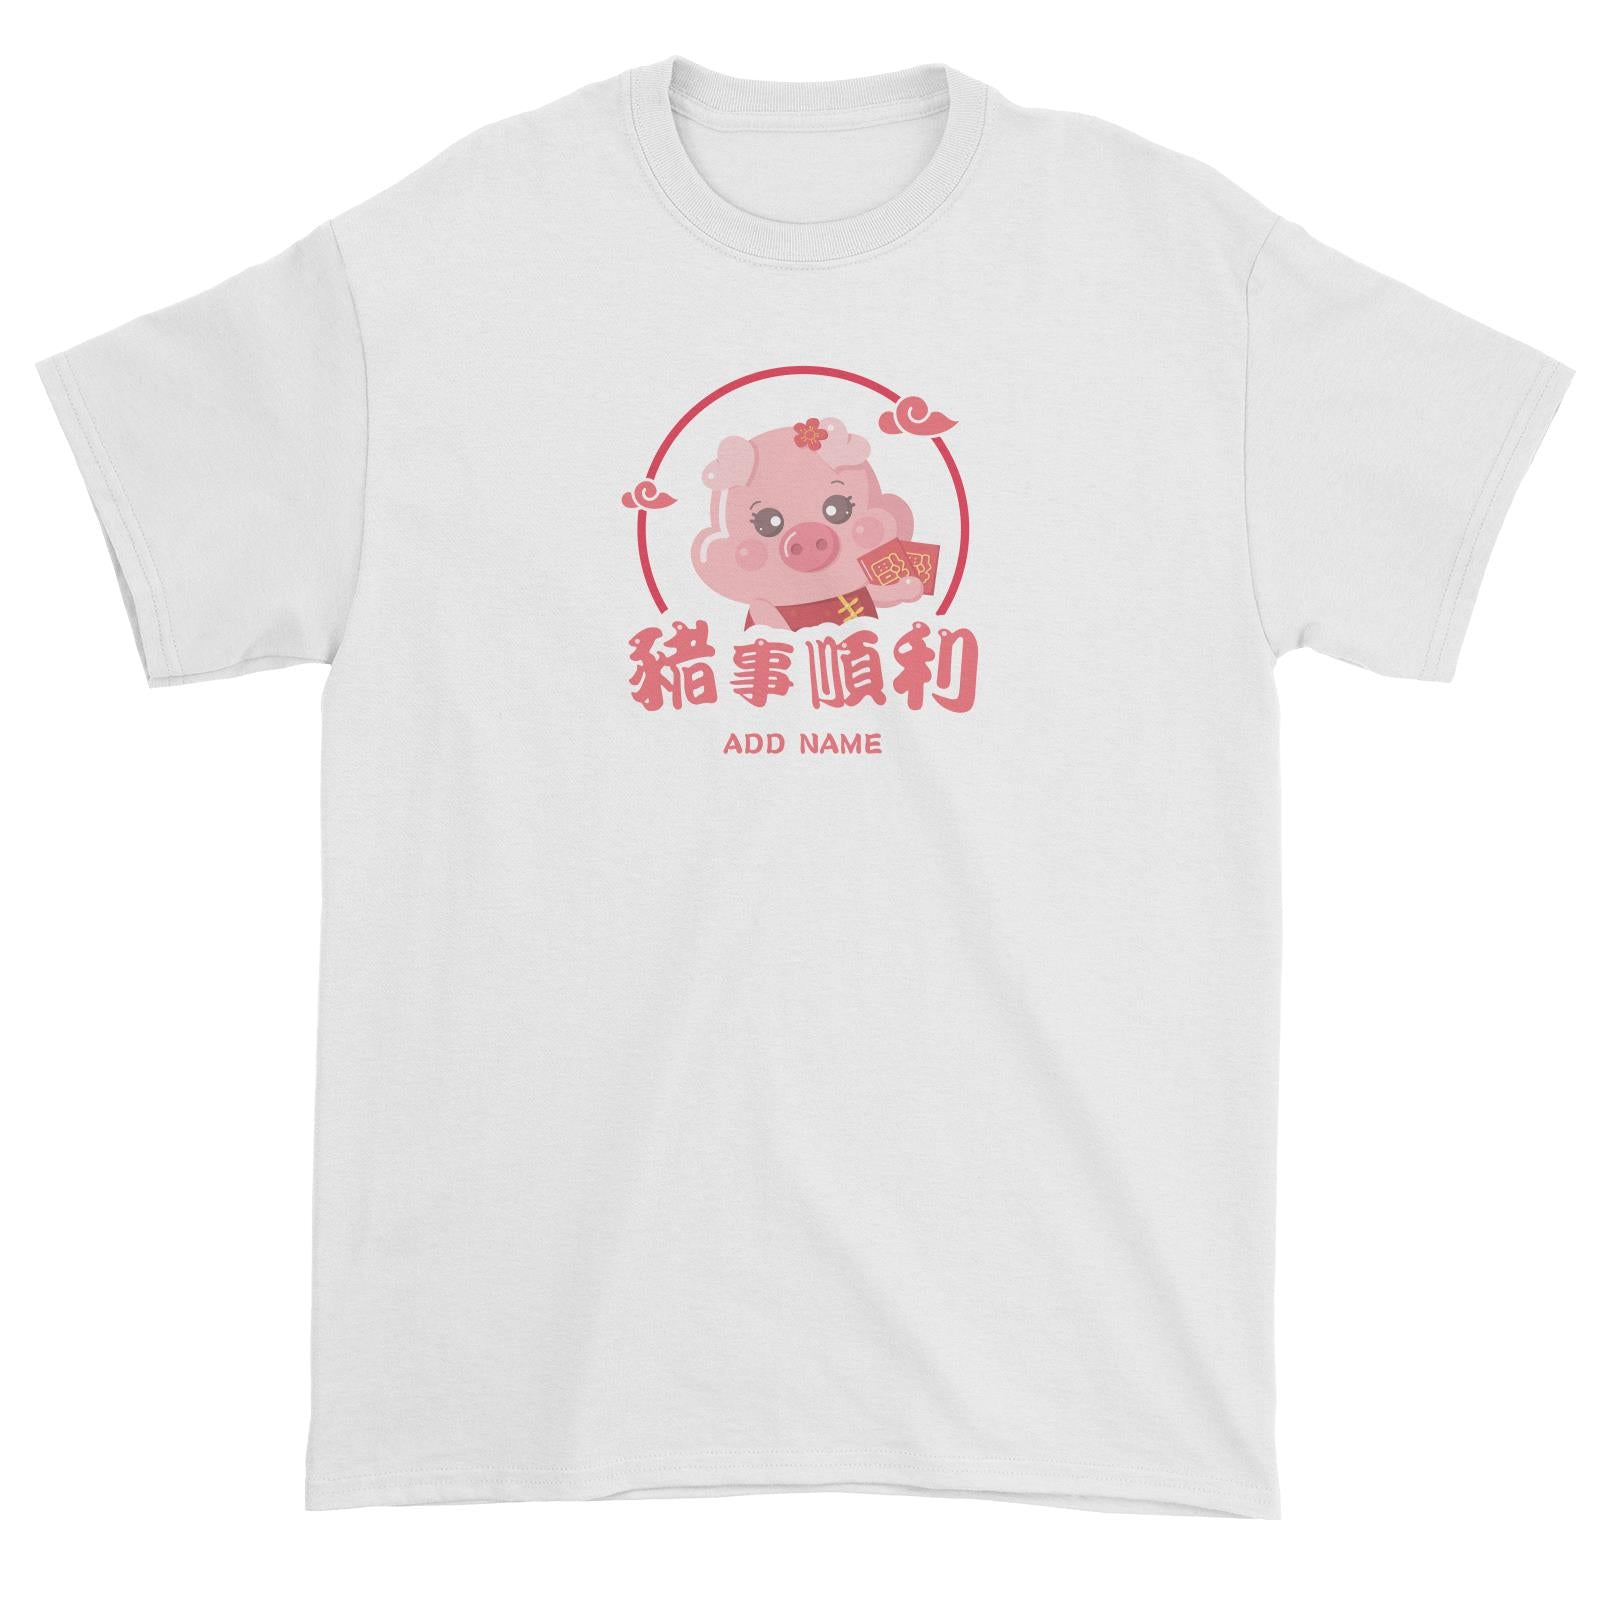 Chinese New Year Cute Pig Emblem Girl With Addname Unisex T-Shirt